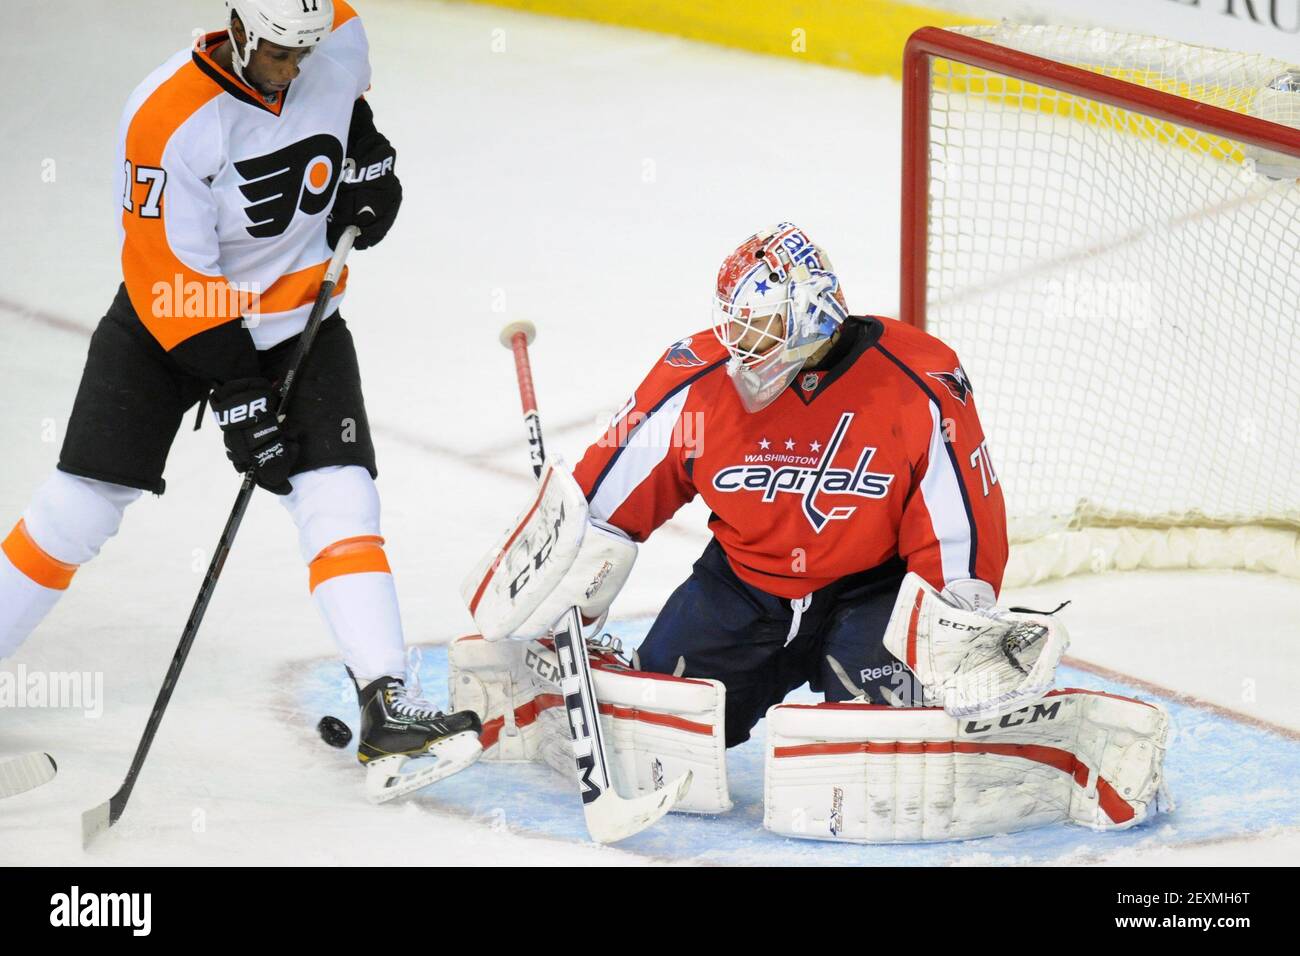 Capitals vs. Flyers: Braden Holtby robs Wayne Simmonds with great